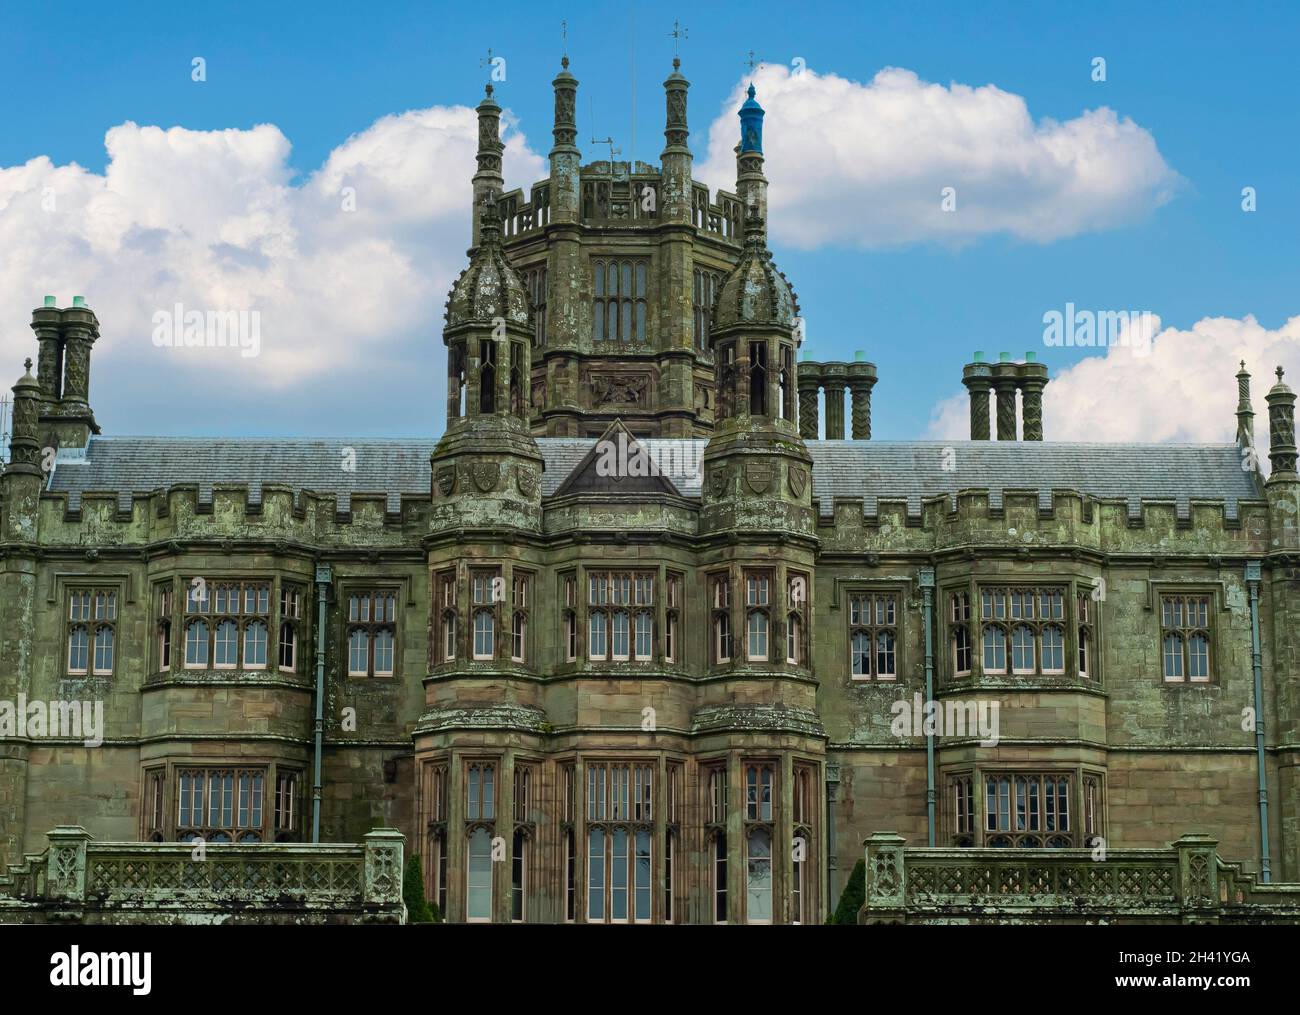 Margam Country Park Foto Stock